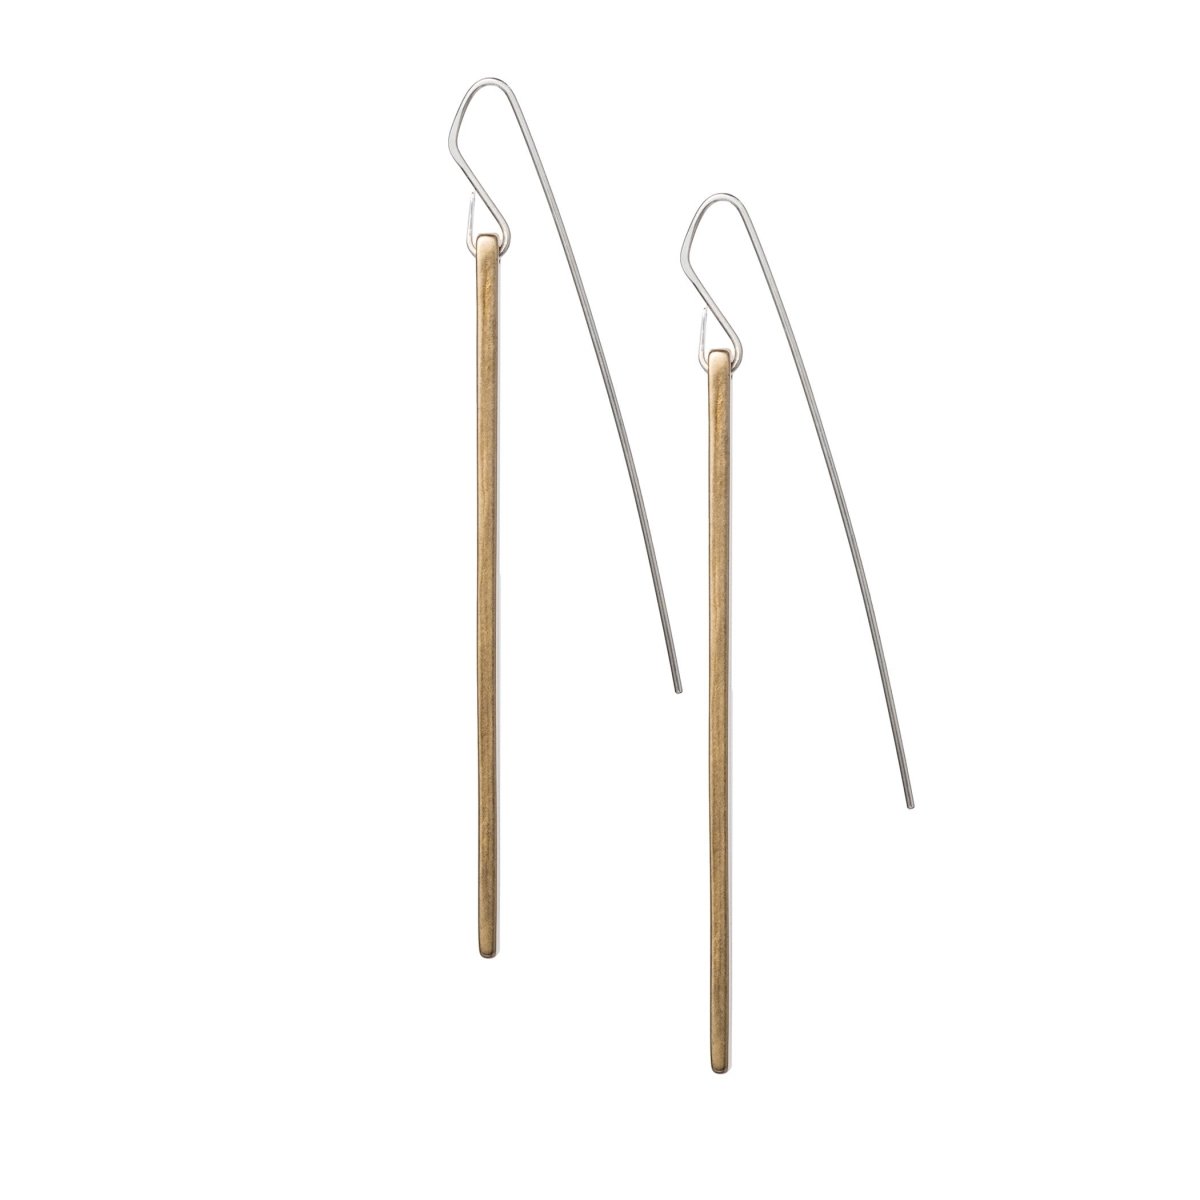 Vertical bronze bar Overlook earrings with silver ear wire.